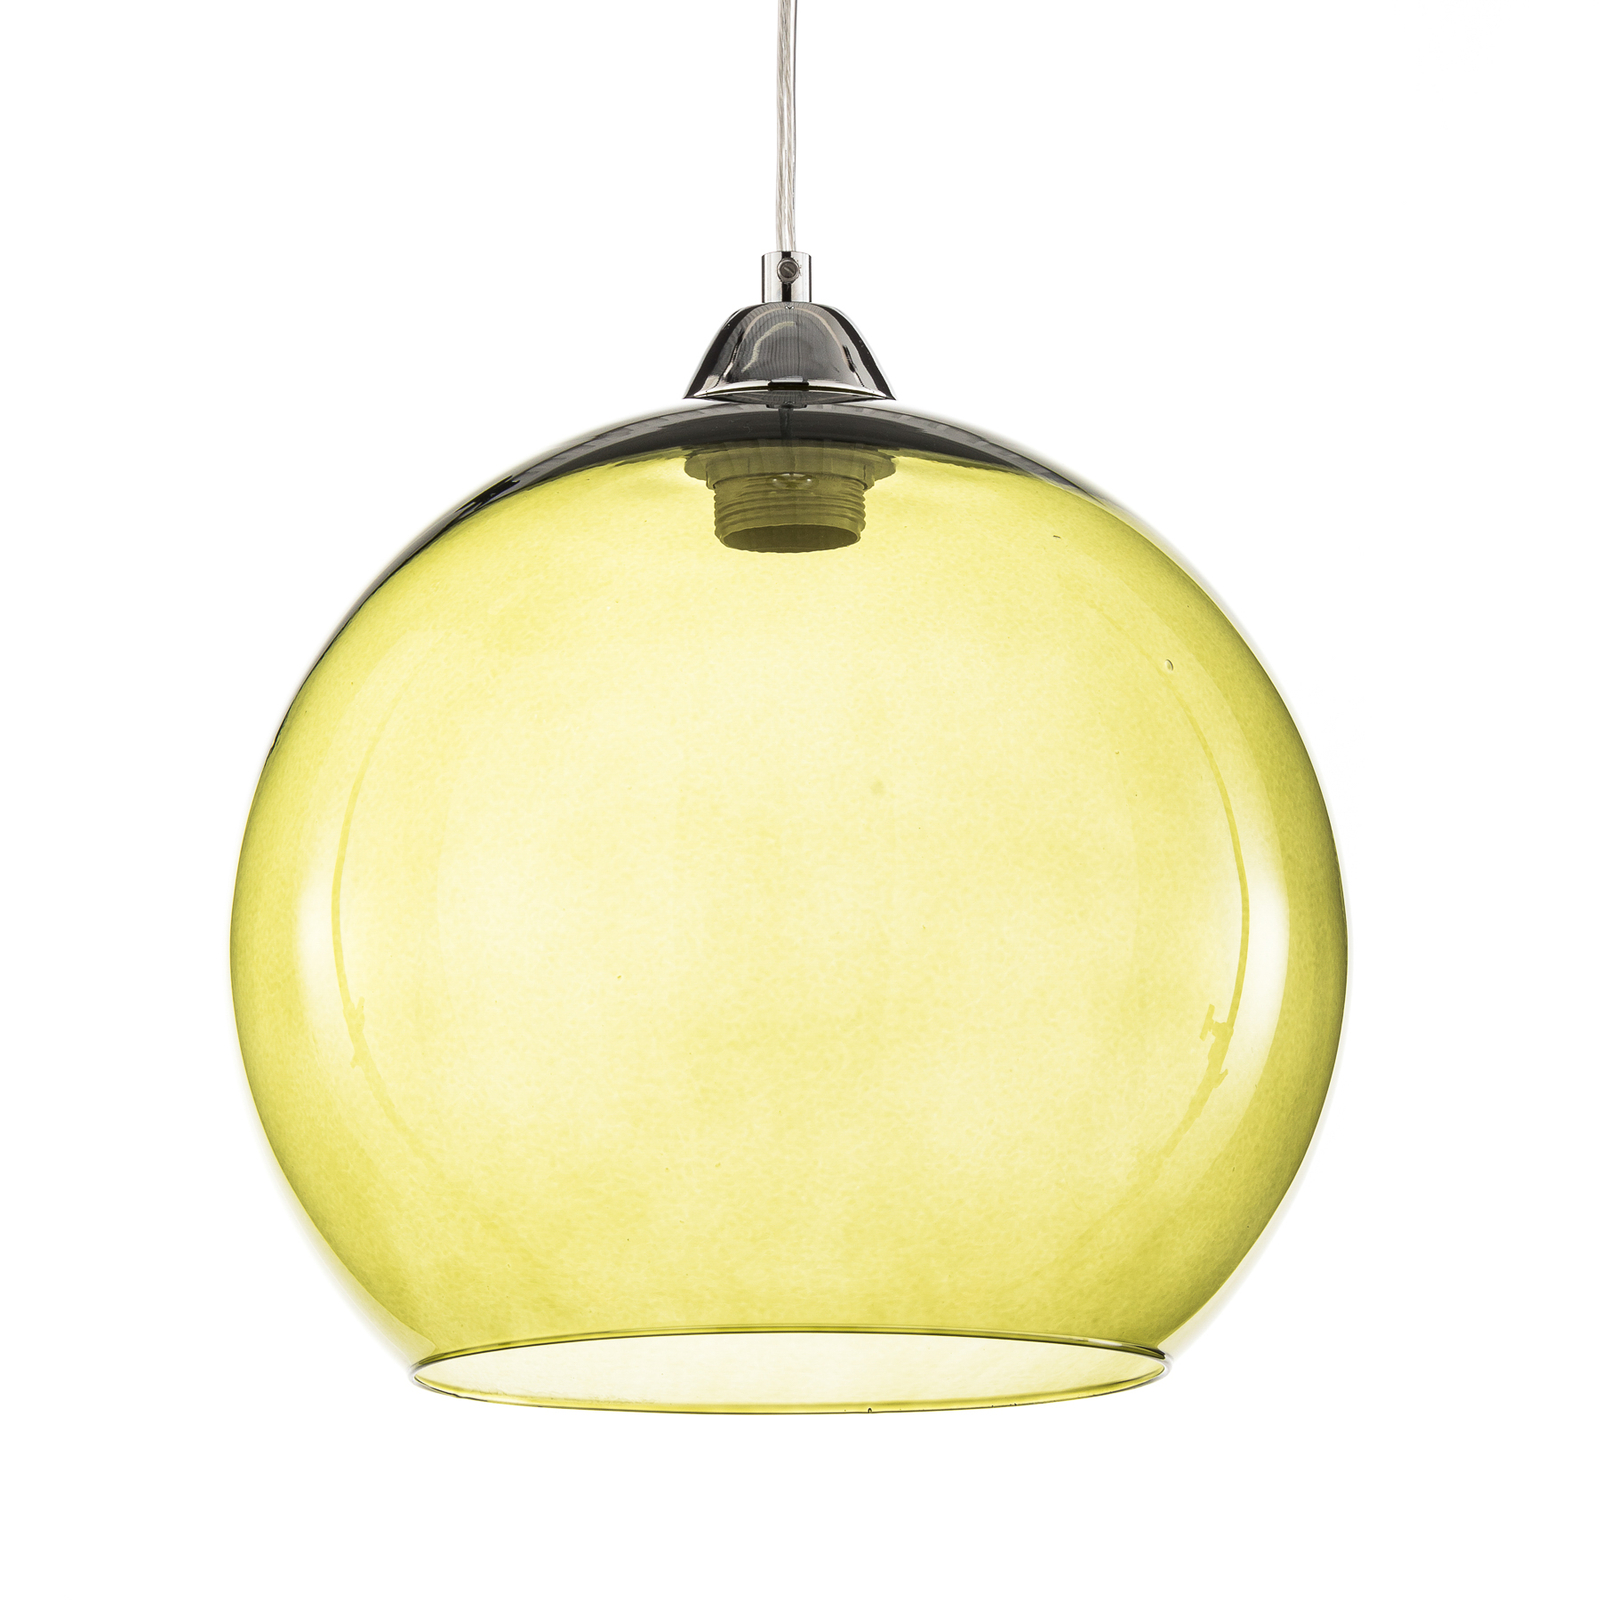 Colour hanging light, green glass lampshade